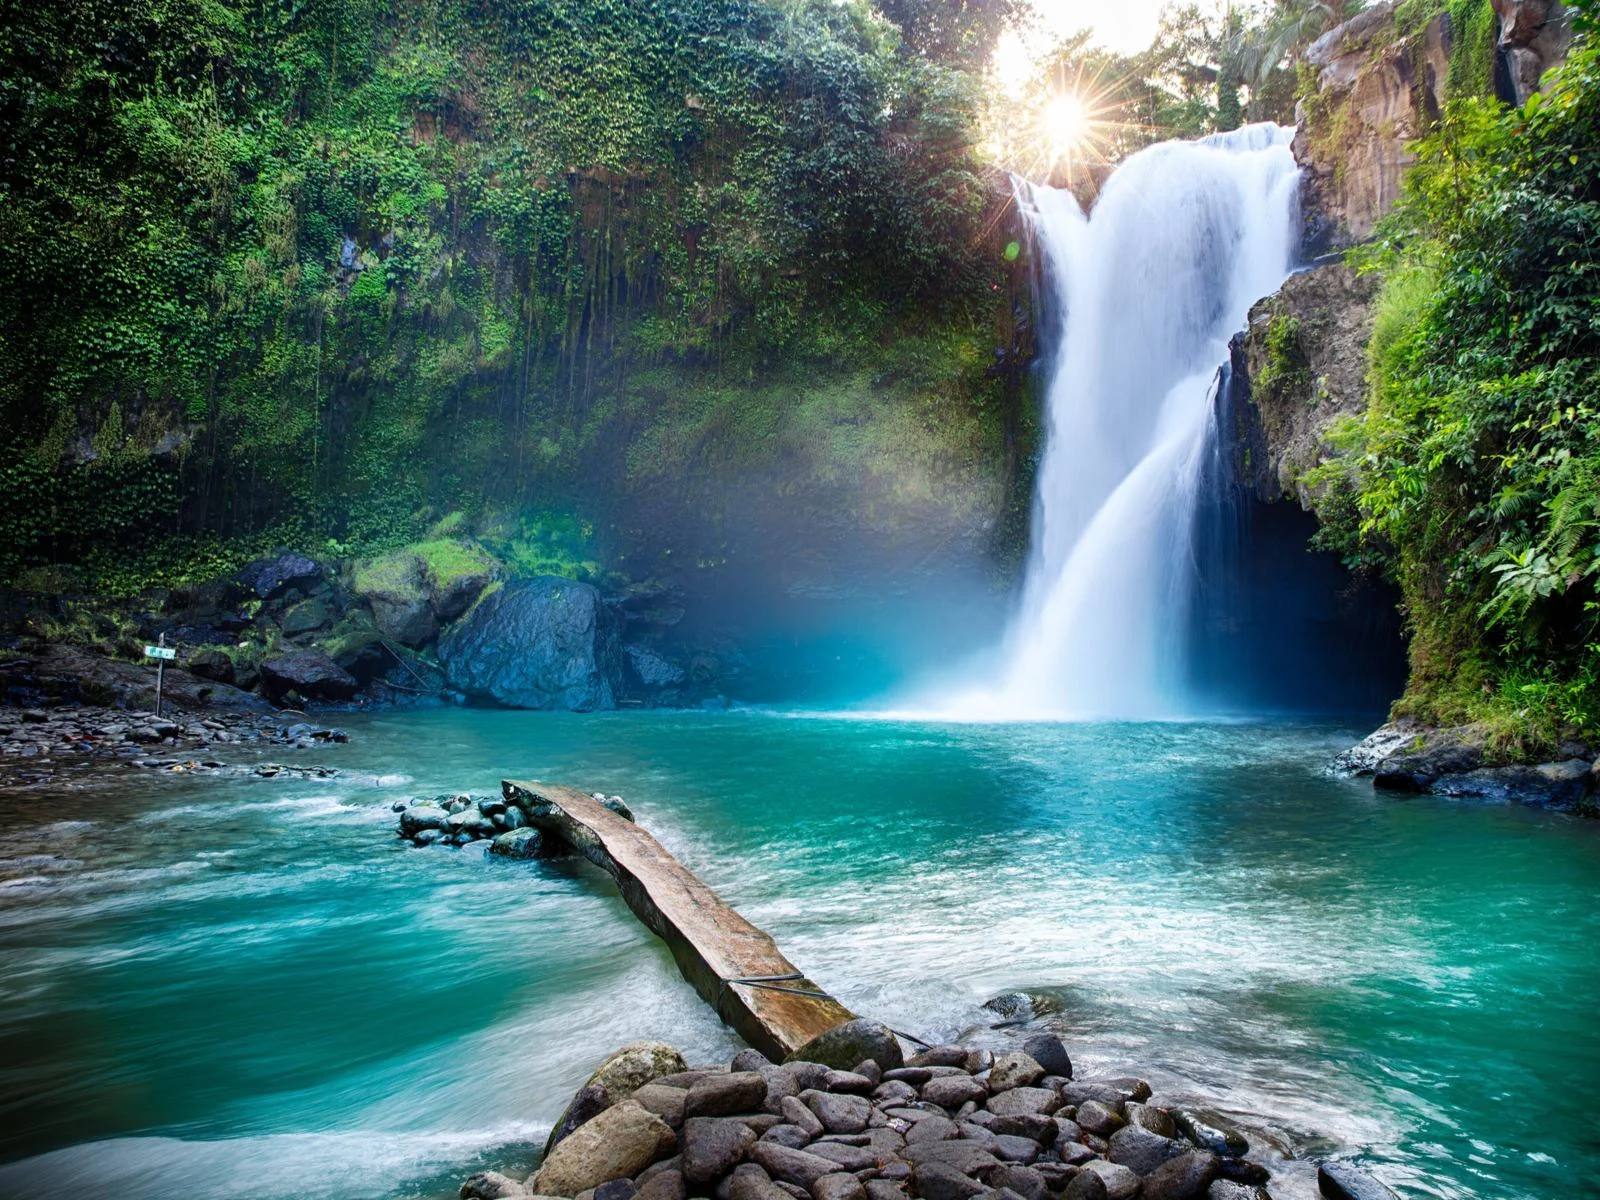 Tegenungan Waterfall in Bali, one of the best island vacations